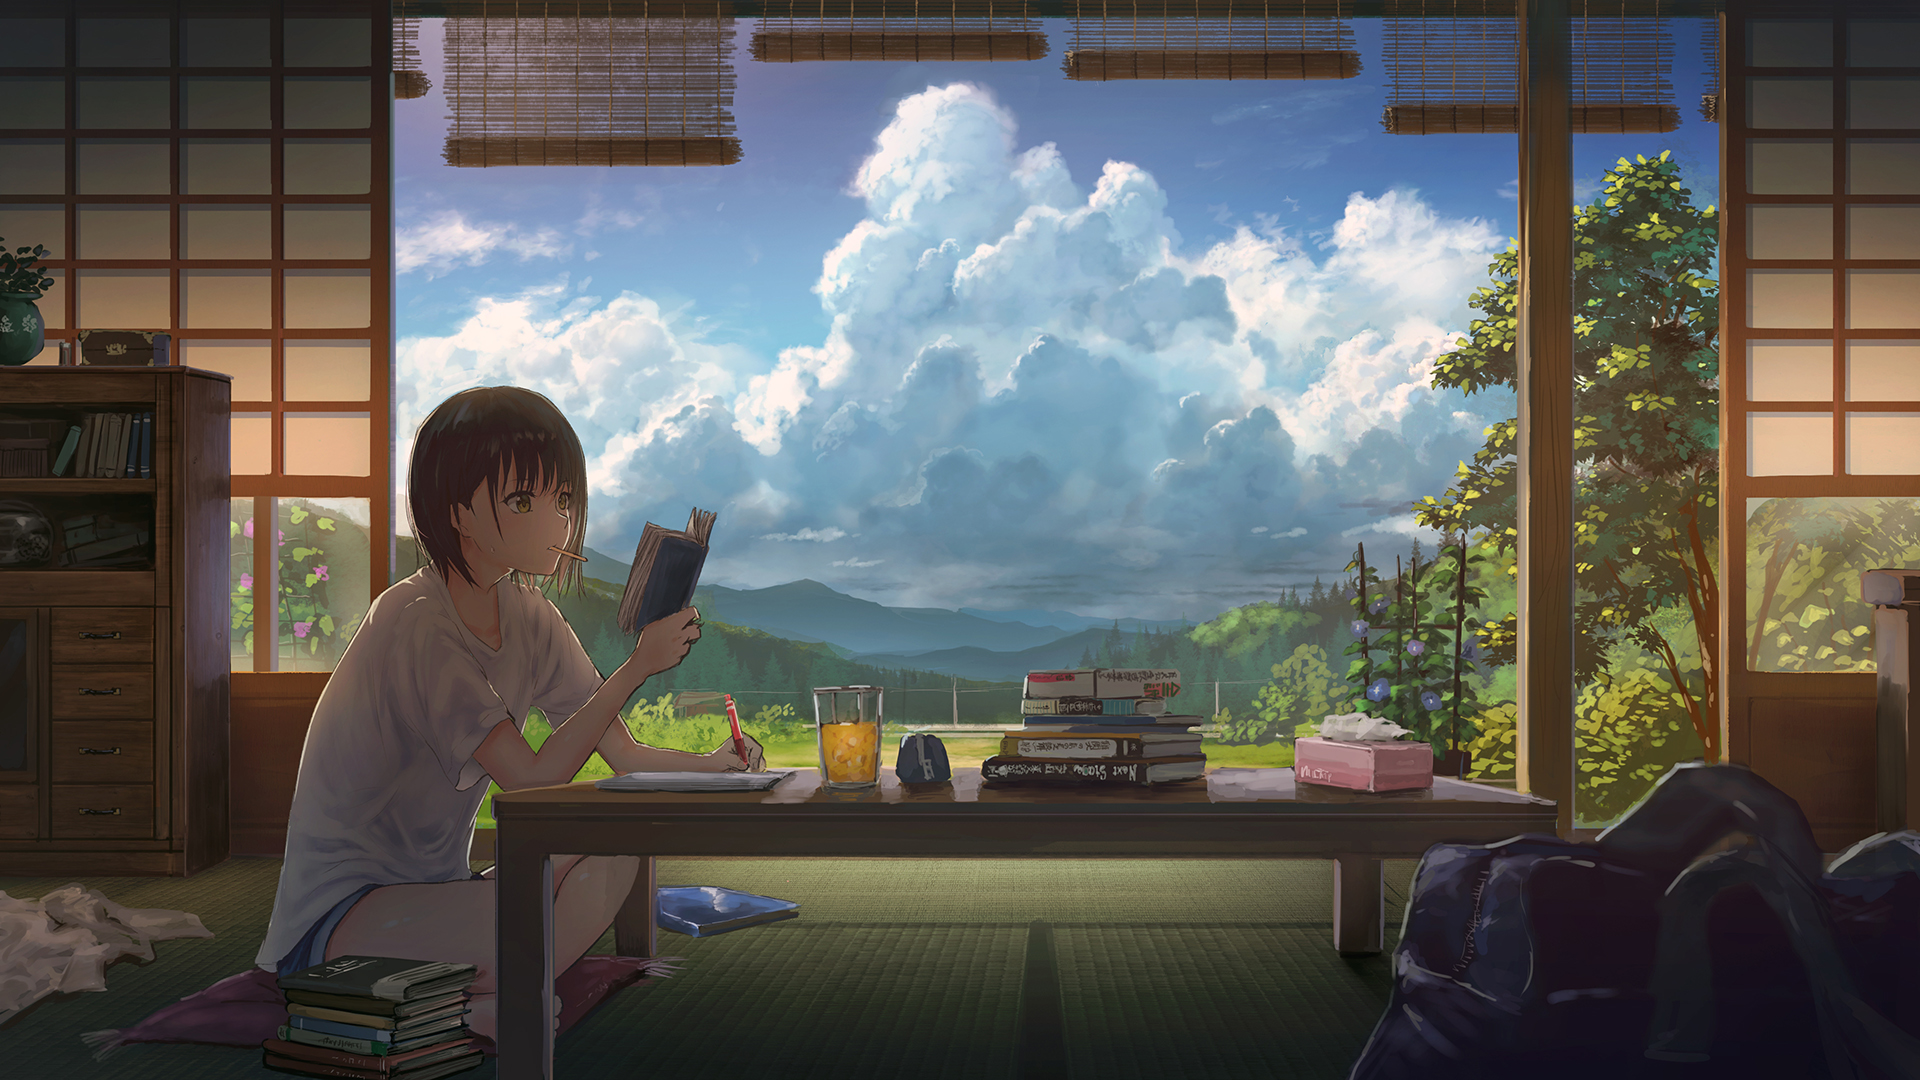 Anime 1920x1080 sky room anime anime girls reading studying black hair brown eyes landscape clouds drink table artwork moescape short hair Sugi87 original characters books interior cabinets sitting legs crossed on the floor cushions shoulder length hair wood trees tissues bag flowers cumulus